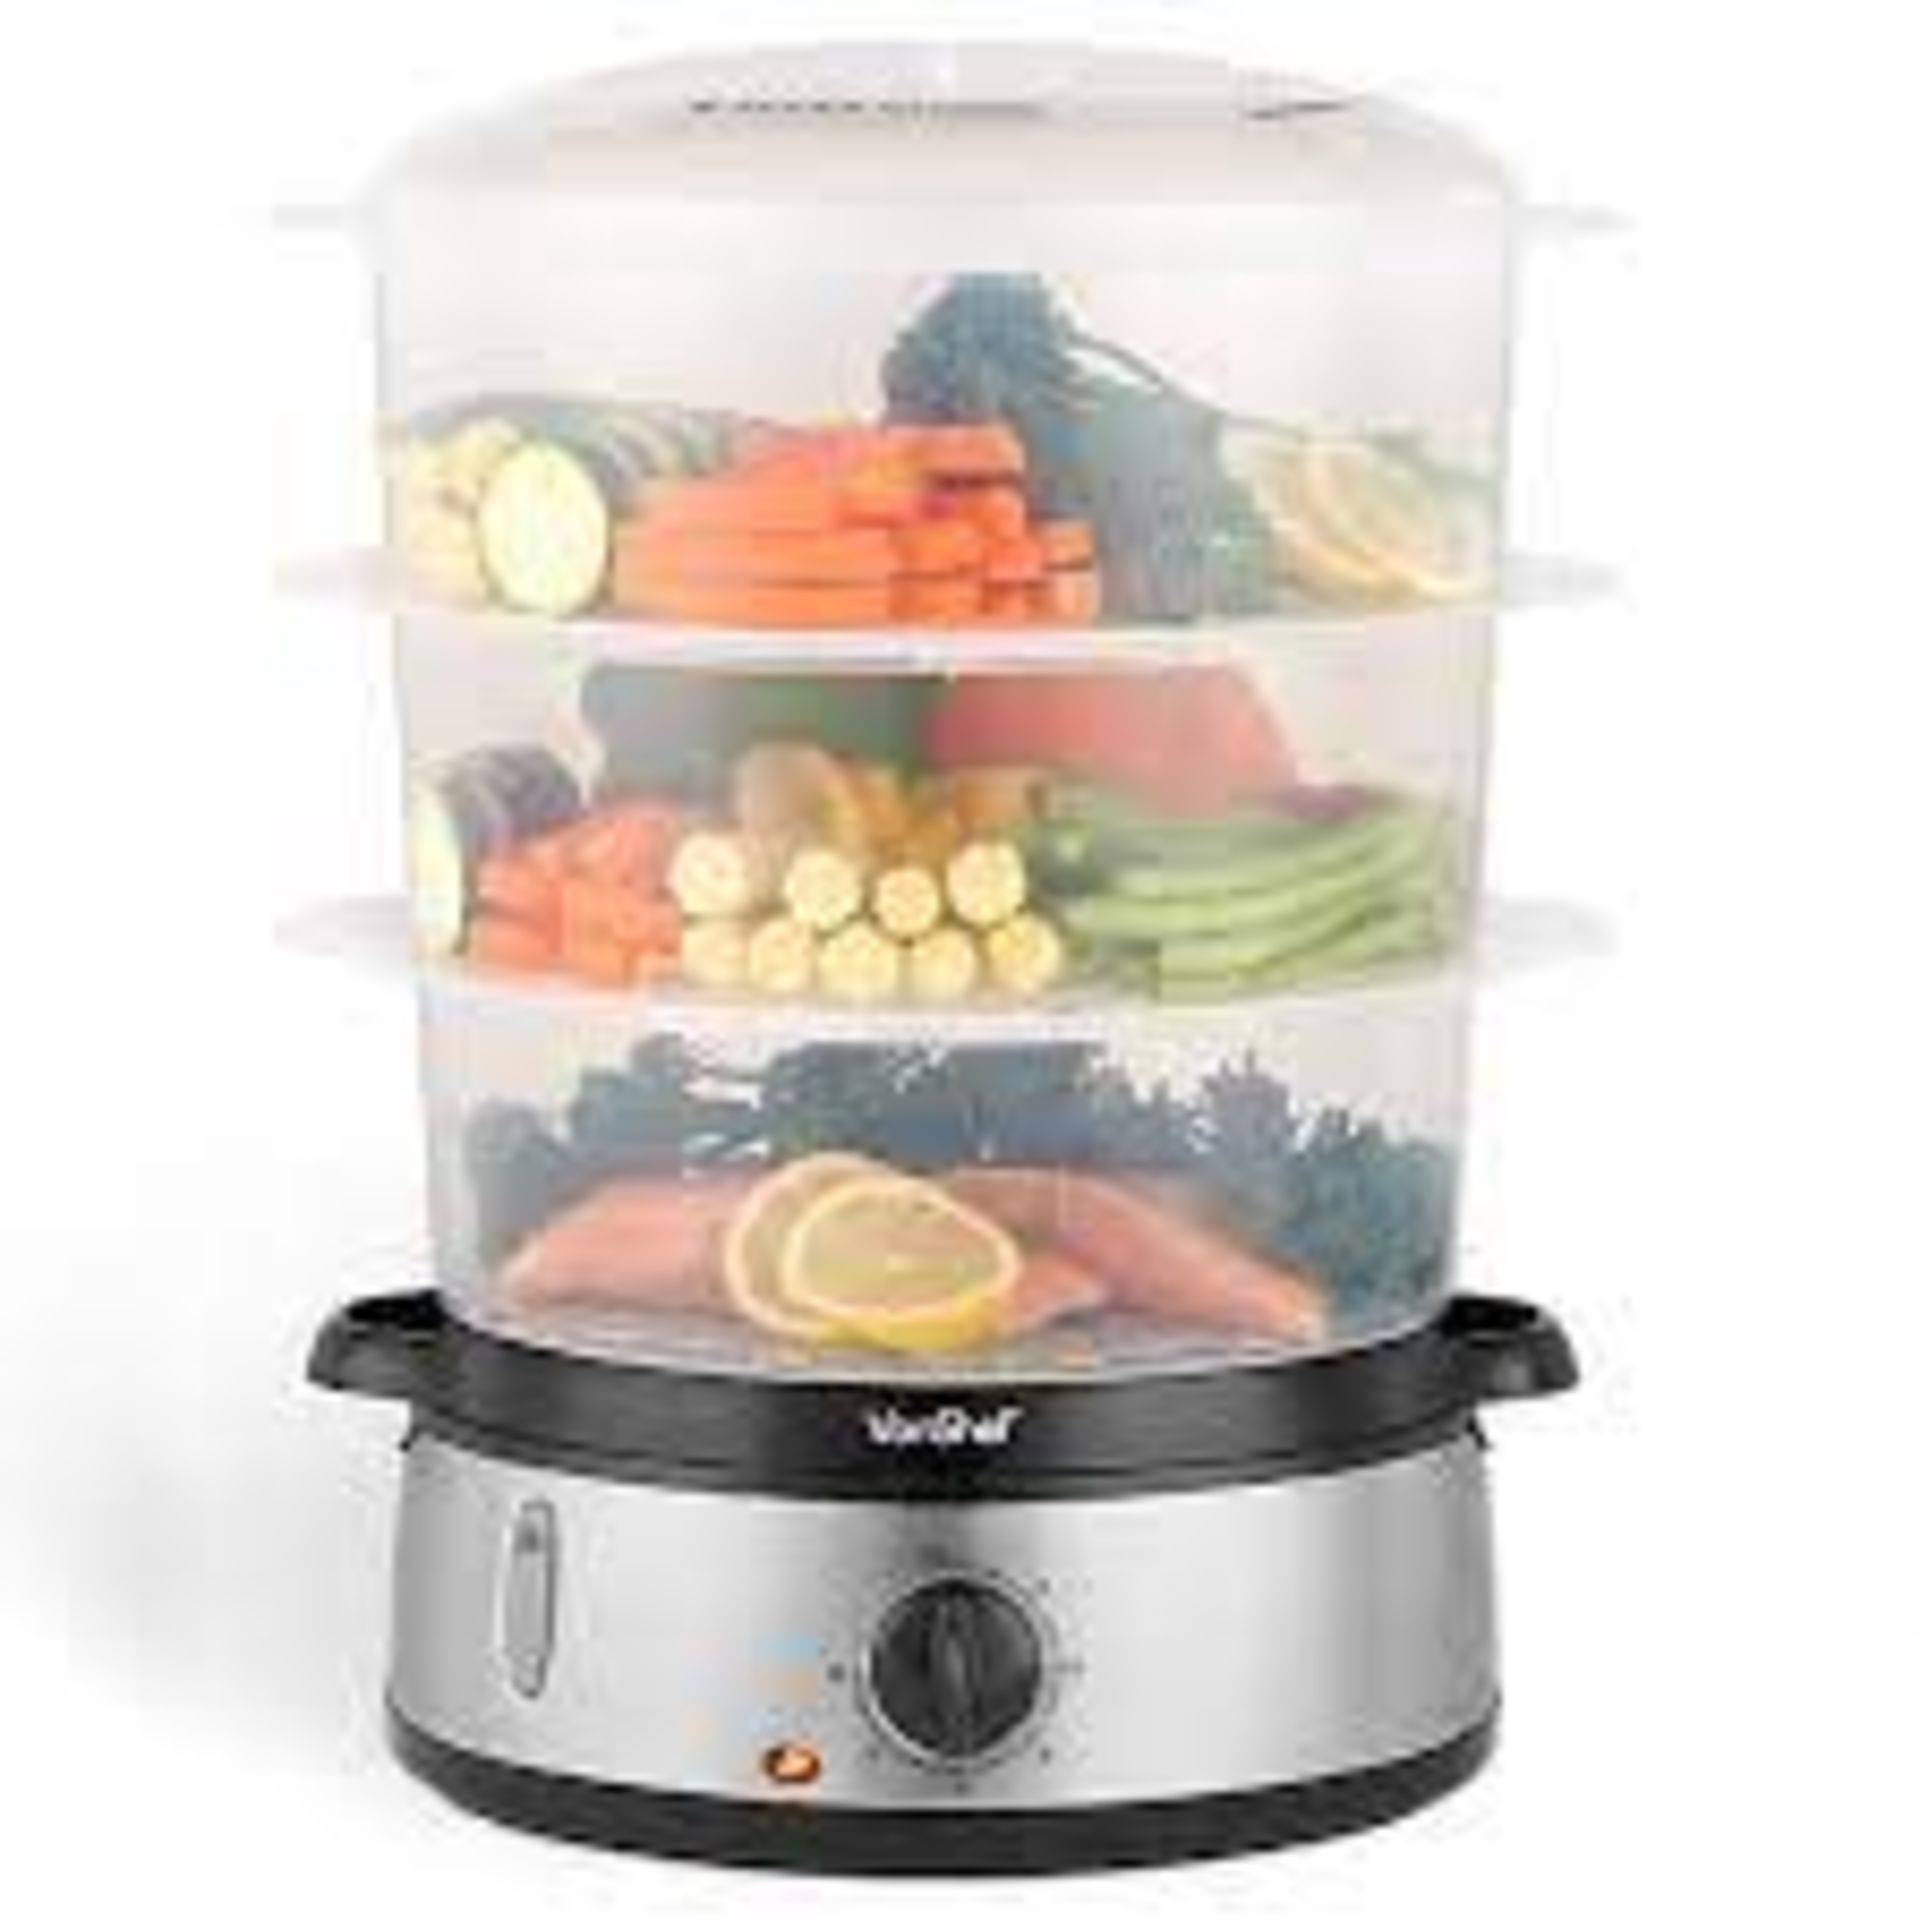 9L Food Steamer 3 Tier, Vegetable Steamer w/ Timer & Rice Bowl for Cooking Veg, Meat, Fish, Rice,